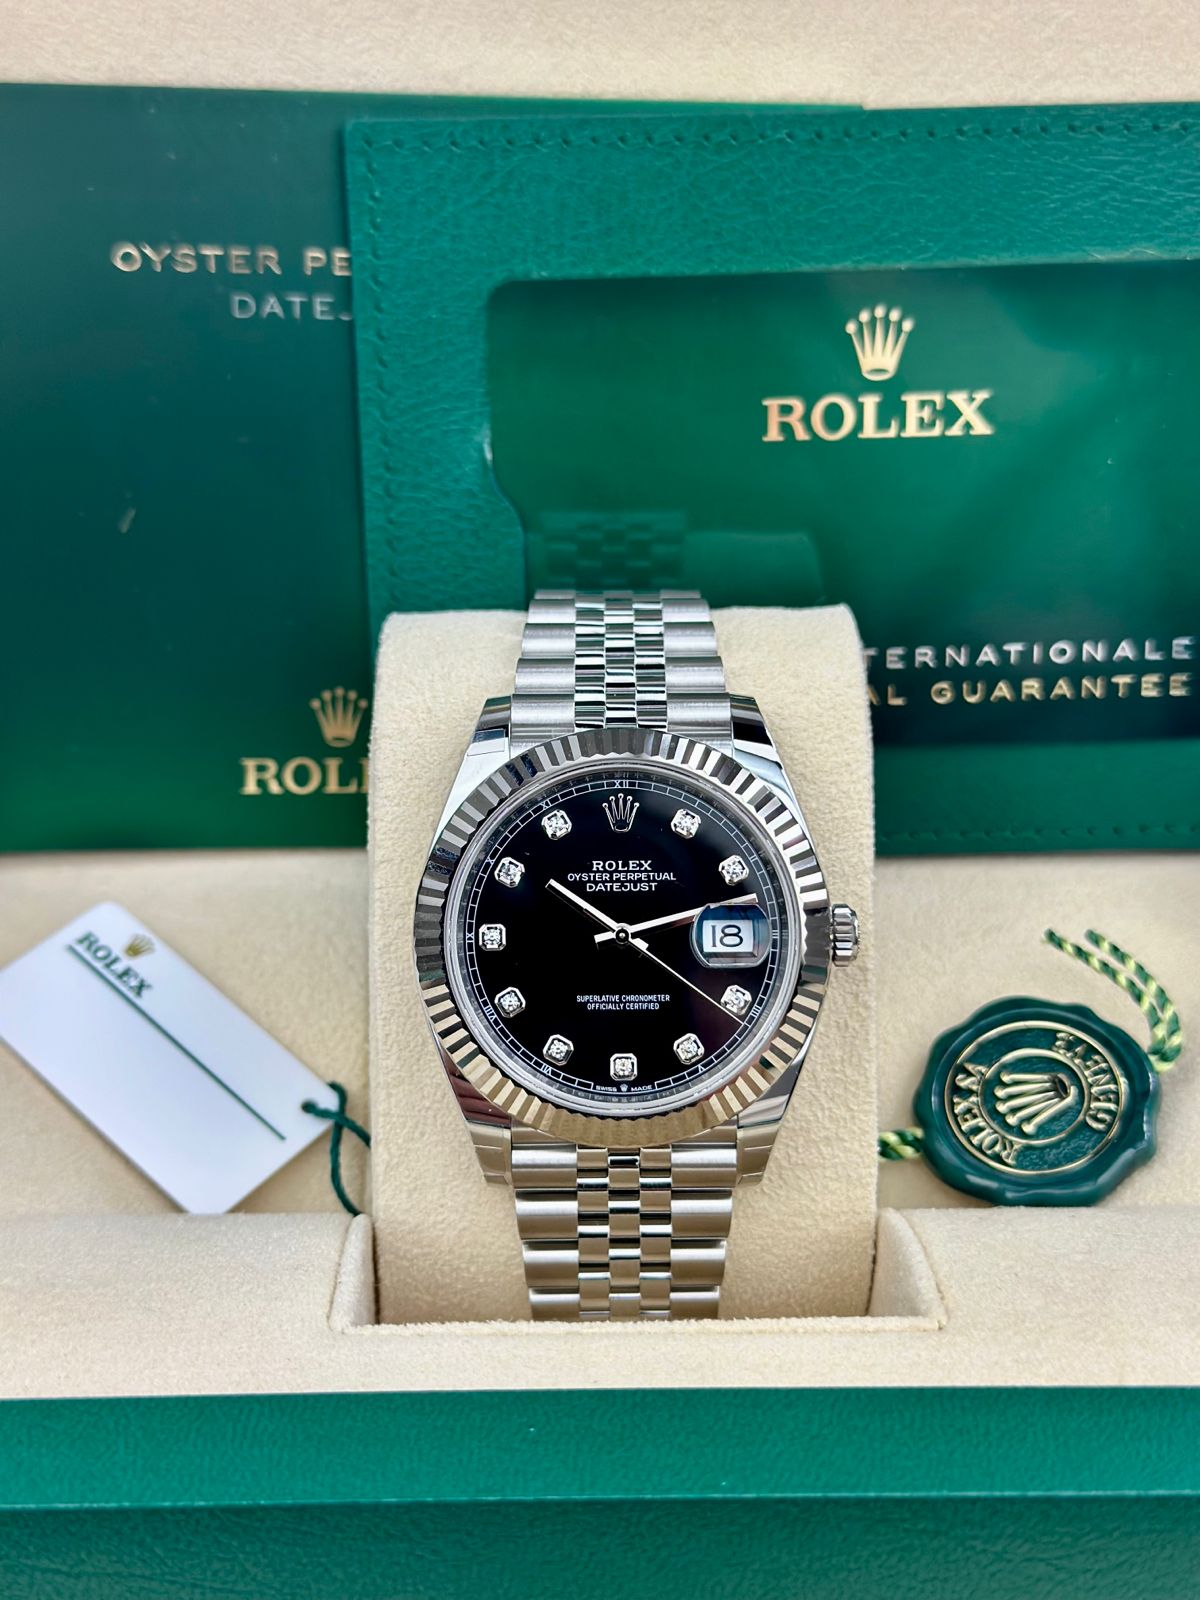 Rolex Datejust 41, Oyster, 41 mm, Oystersteel and White Gold, Black Diamond-set dial, Jubilee bracelet, 126334